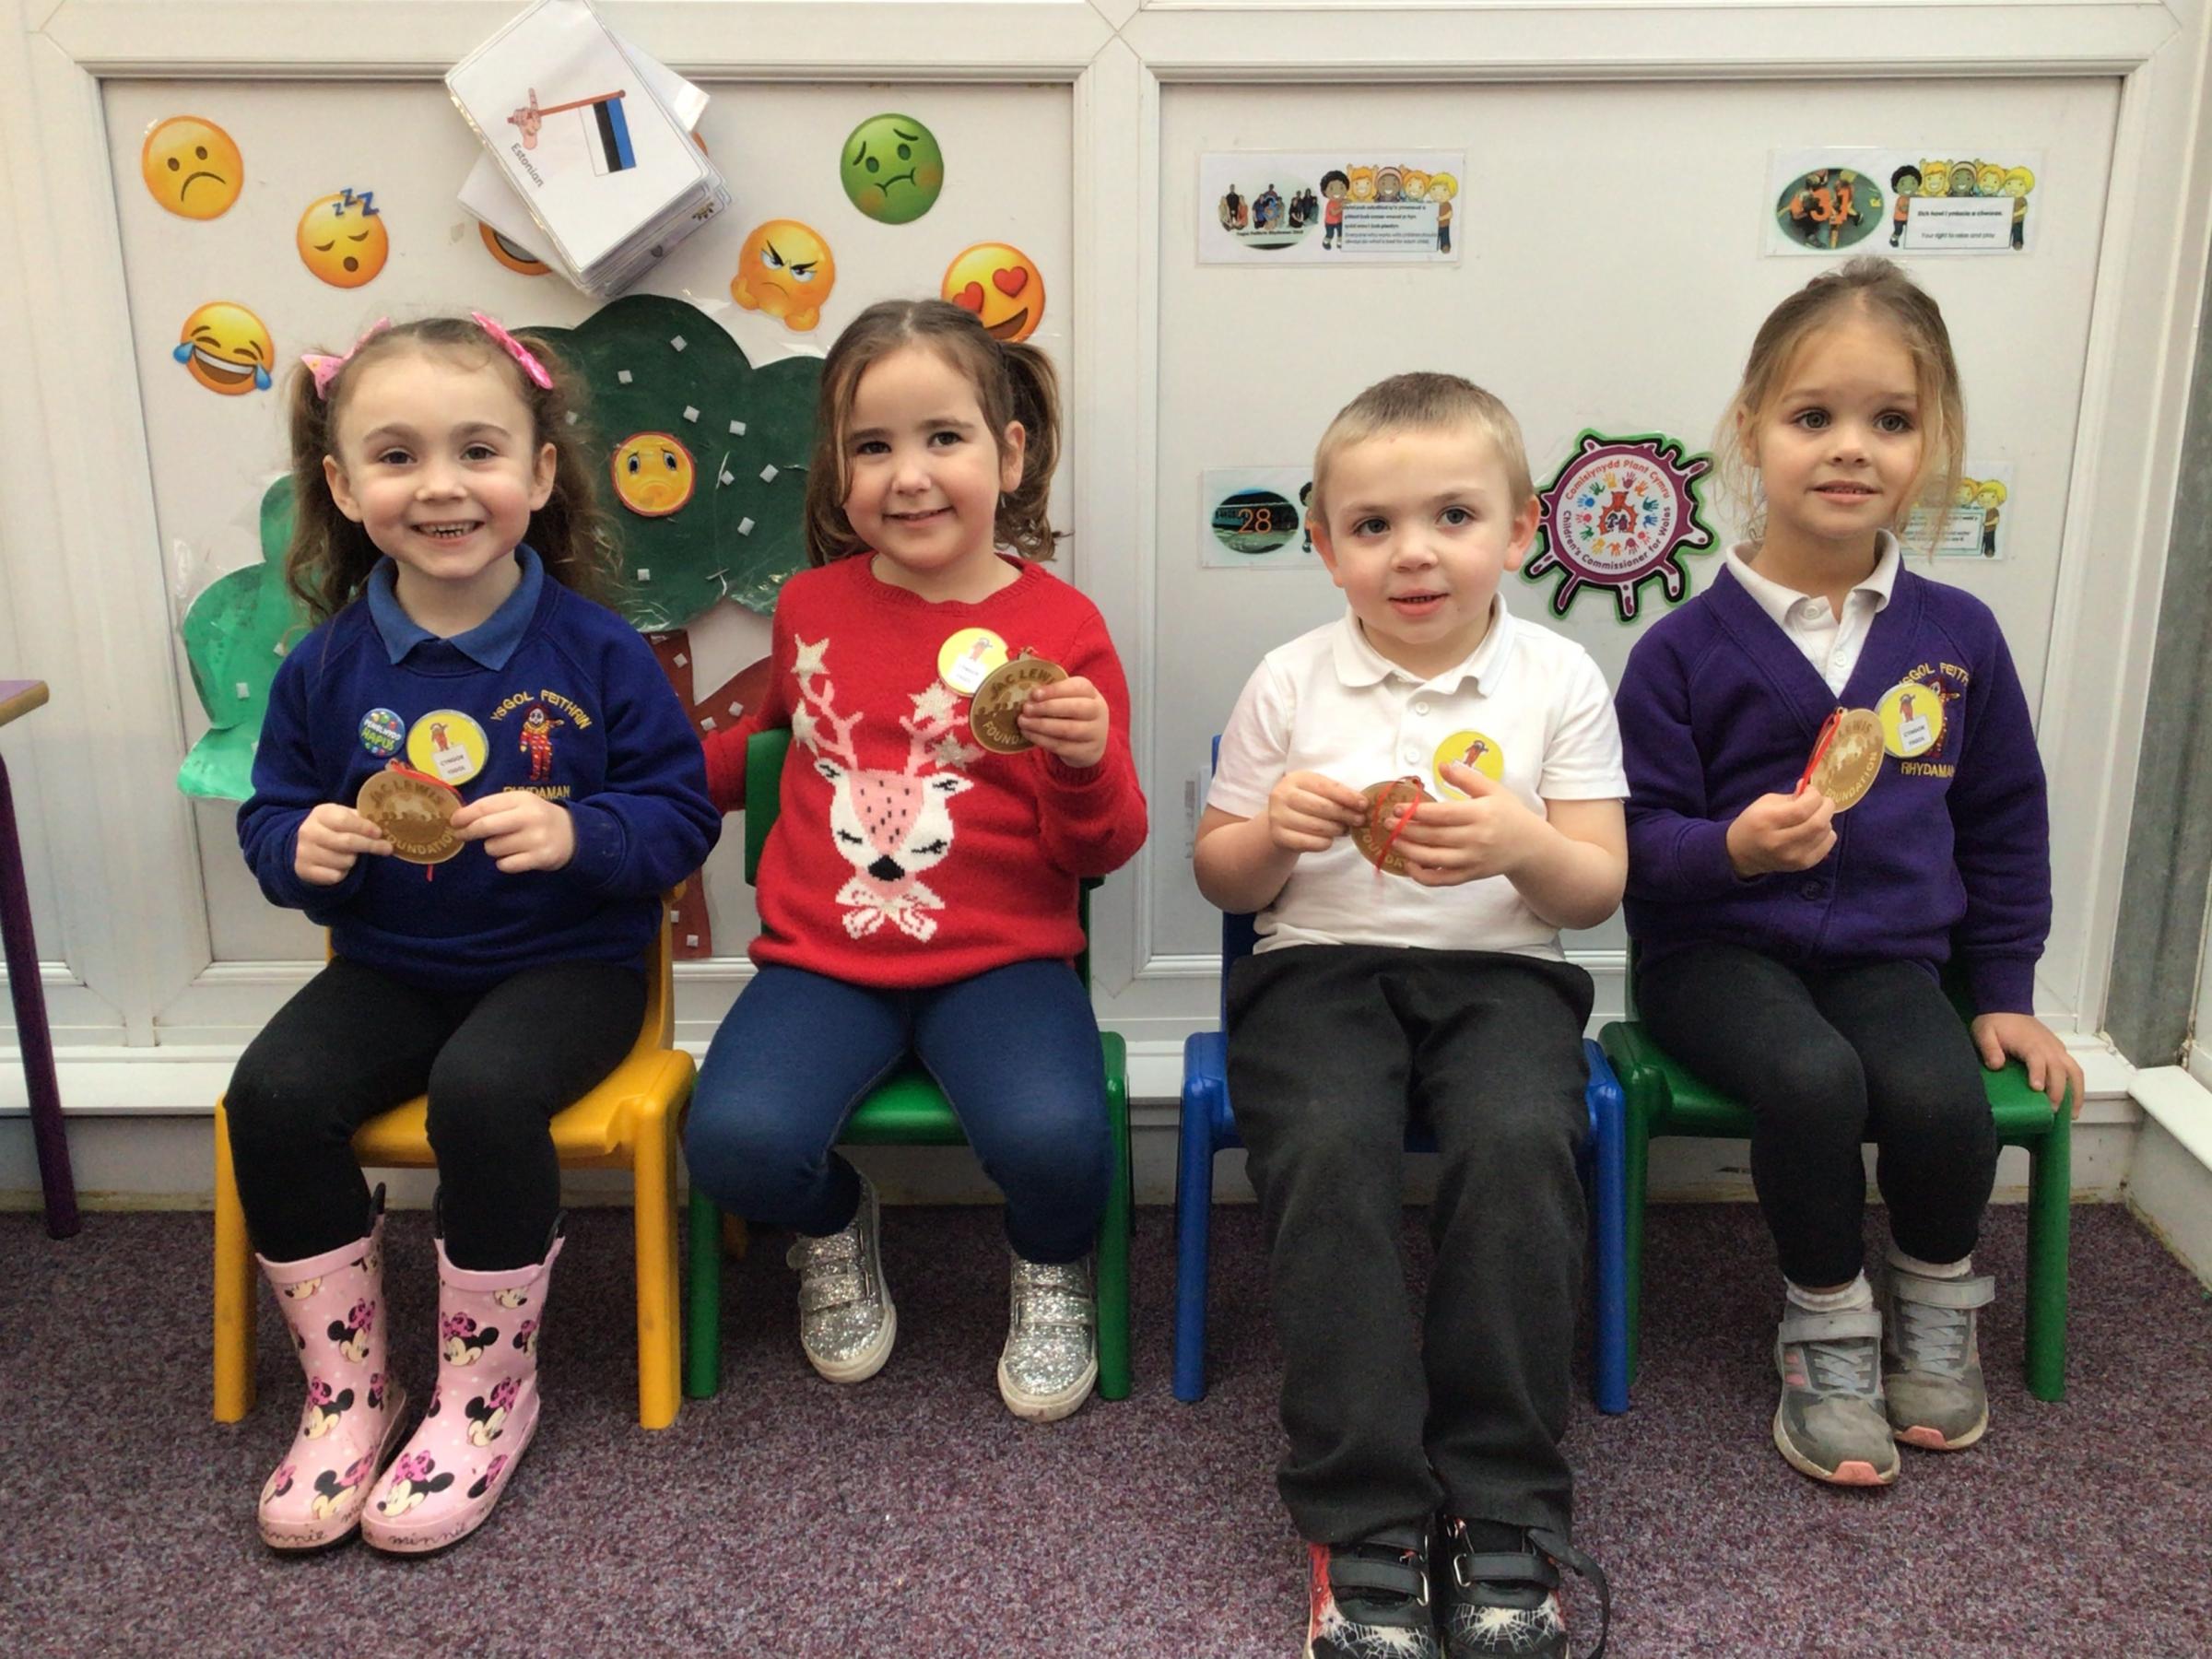 The youngsters at Ammanford nursery were gifted medals to thank them for their fundraising efforts